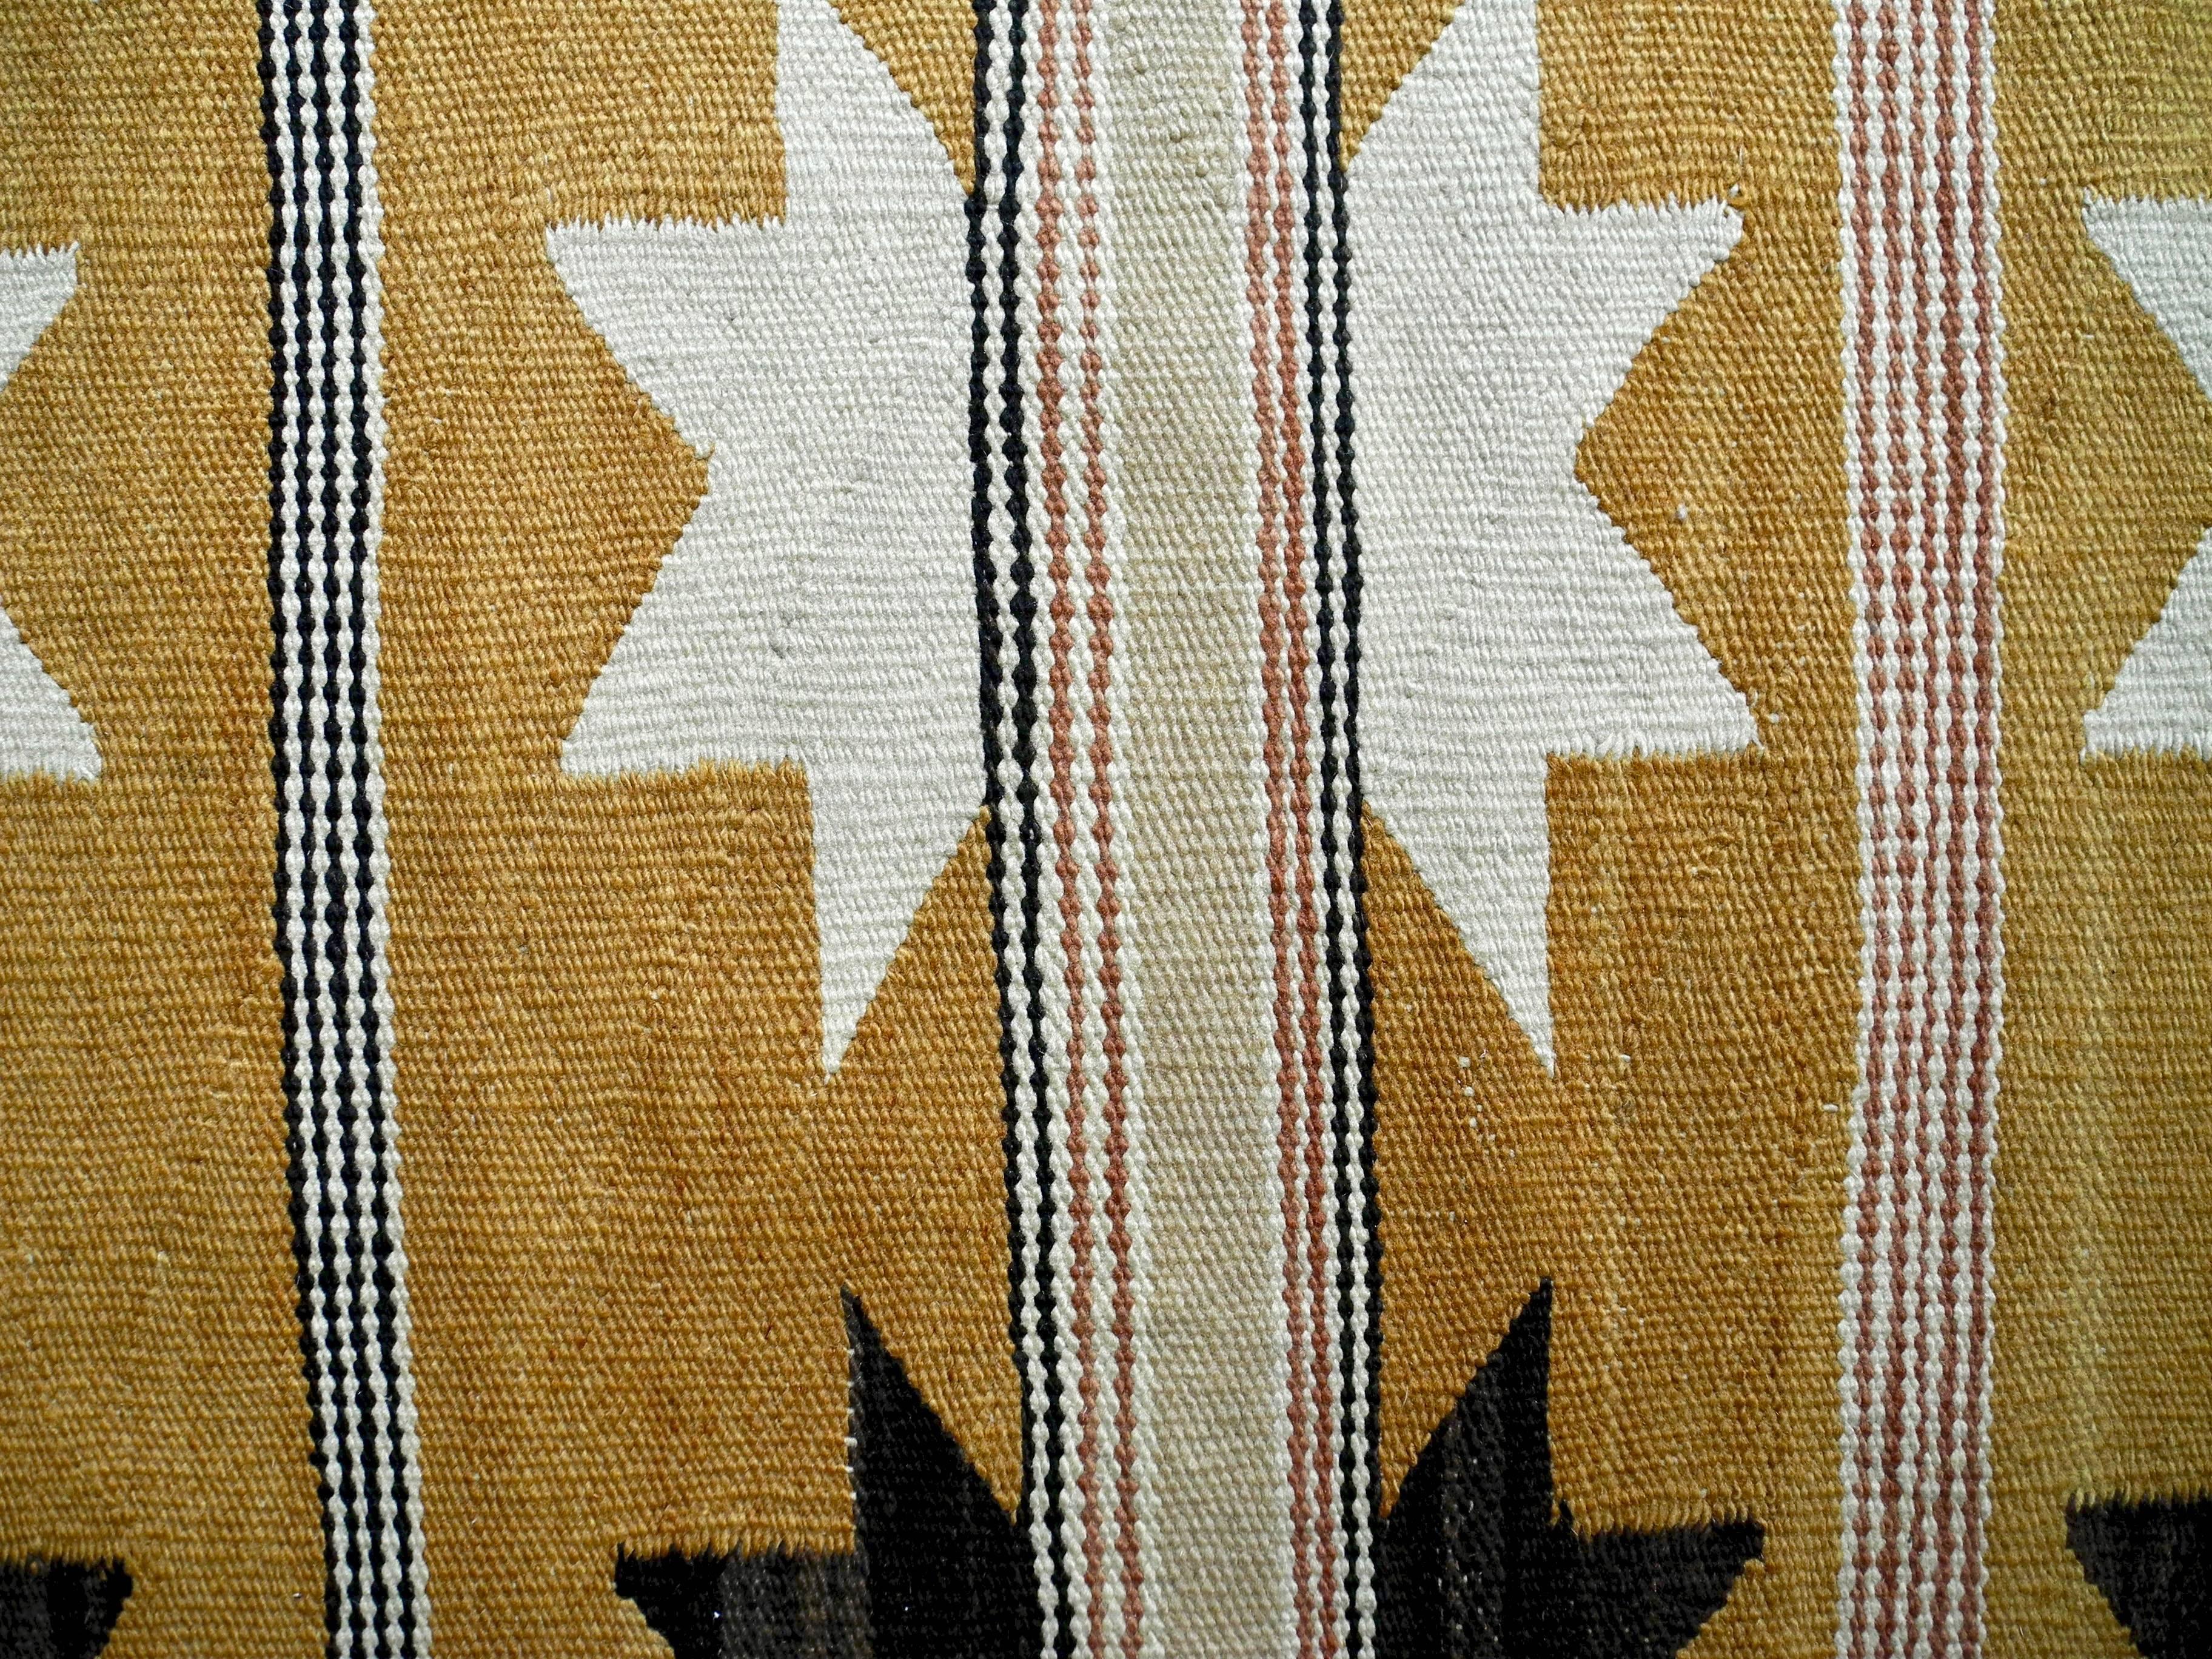 This Navajo rug is a simple / minimal design of eight point stars in black and white, on an ocher yellow background with intersecting stripes in natural wool tones.